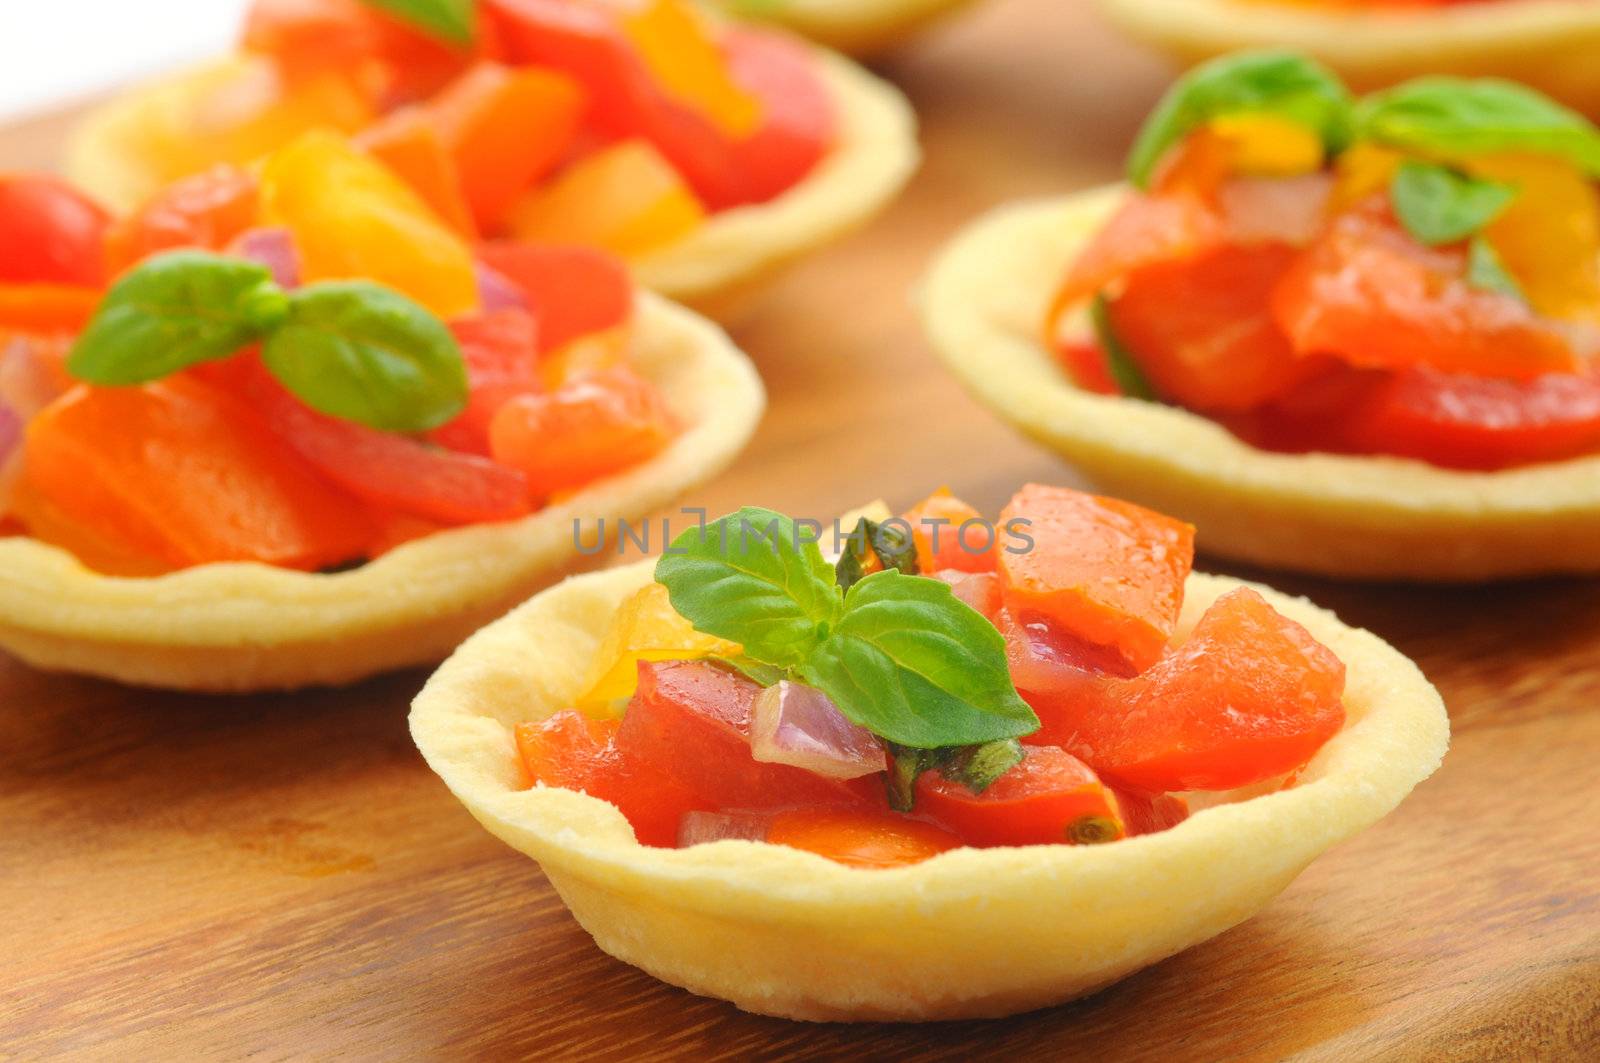 Italian styles appetizer of tomatoes, garlic and basil.